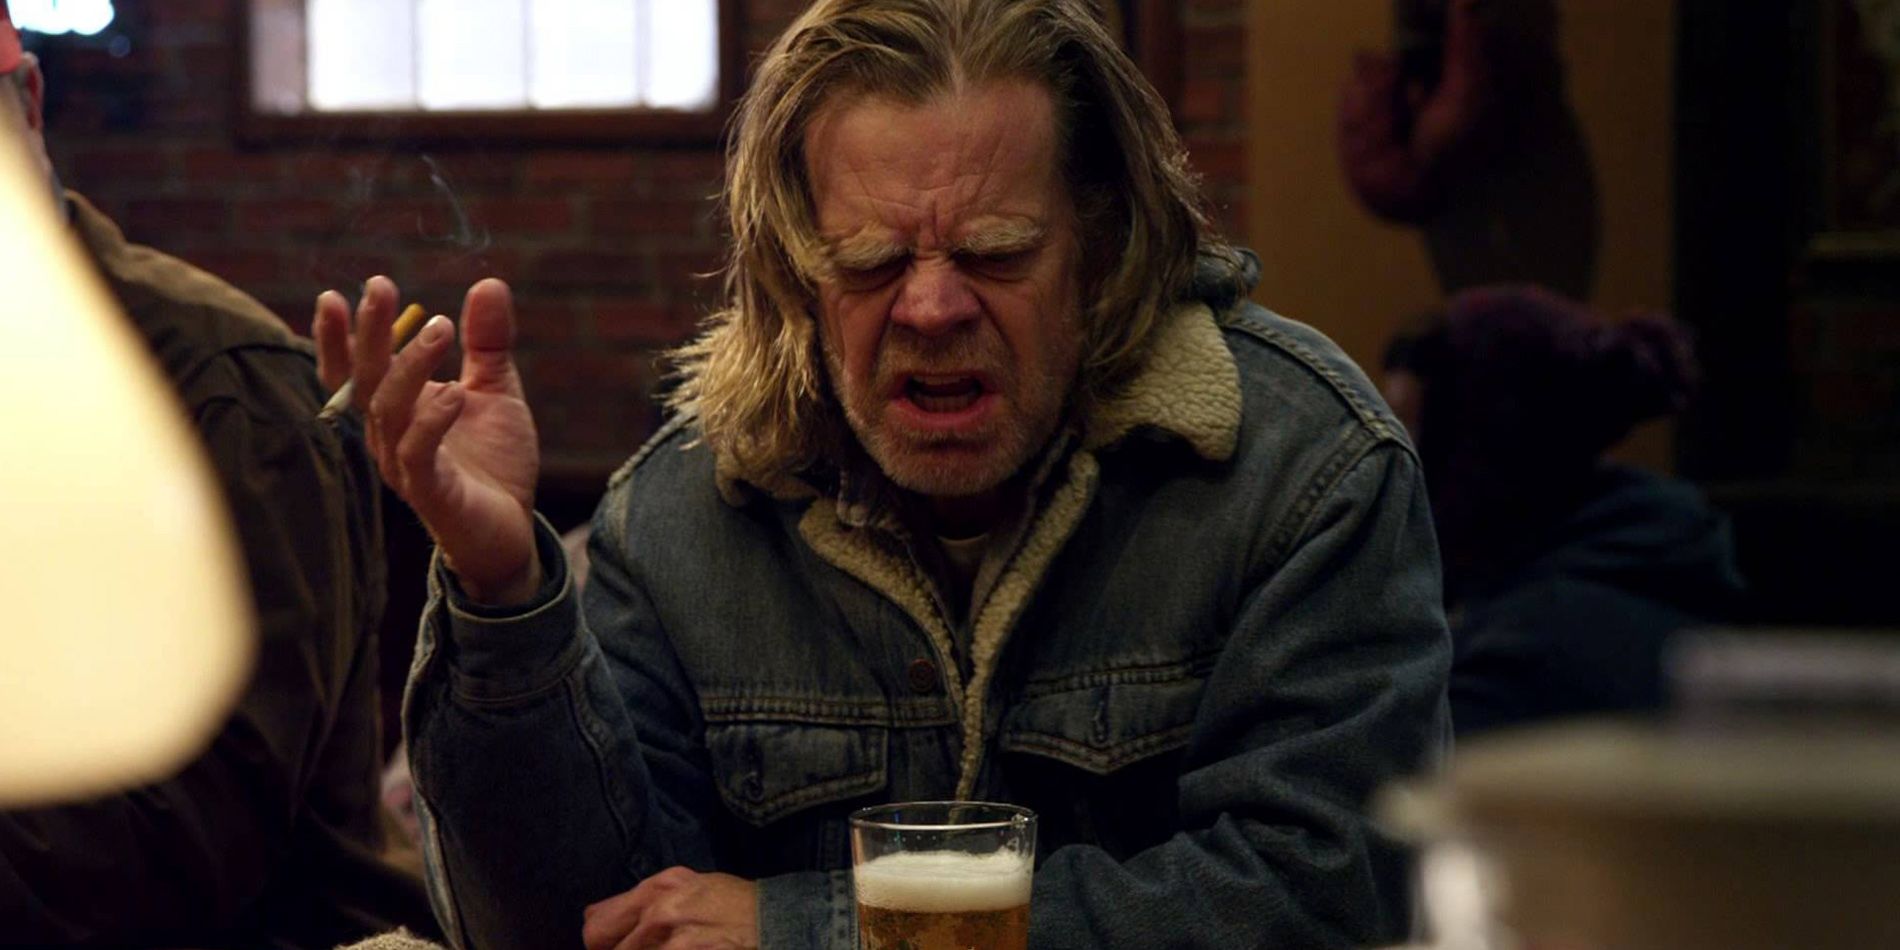 20 Things Wrong With Shameless We All Choose to Ignore